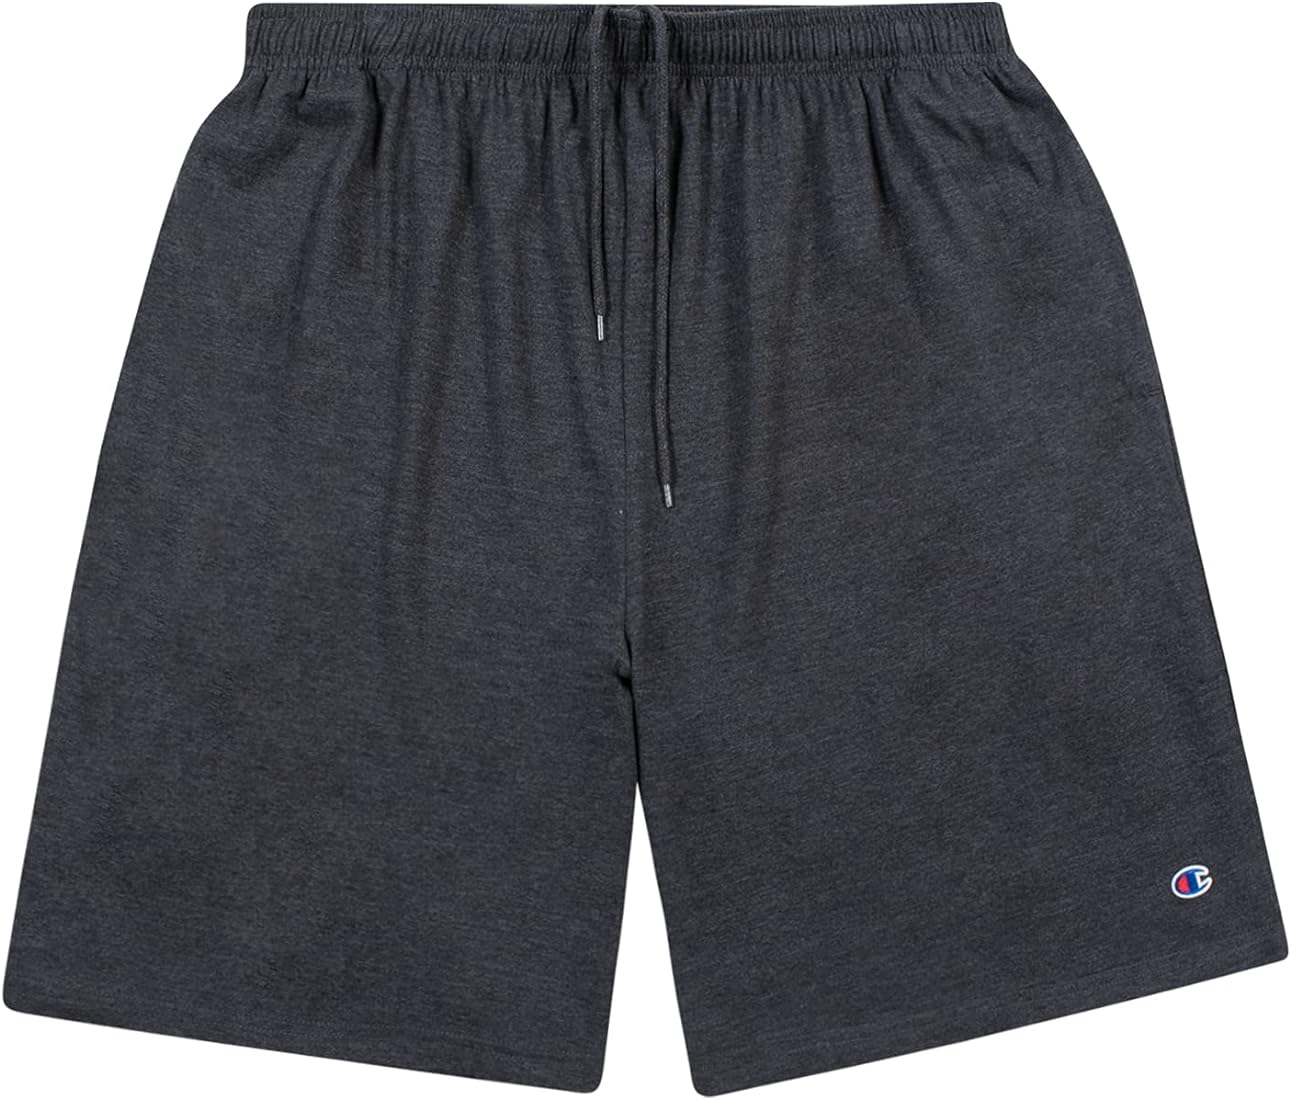 15 Incredible Champion Gym Shorts For 2023